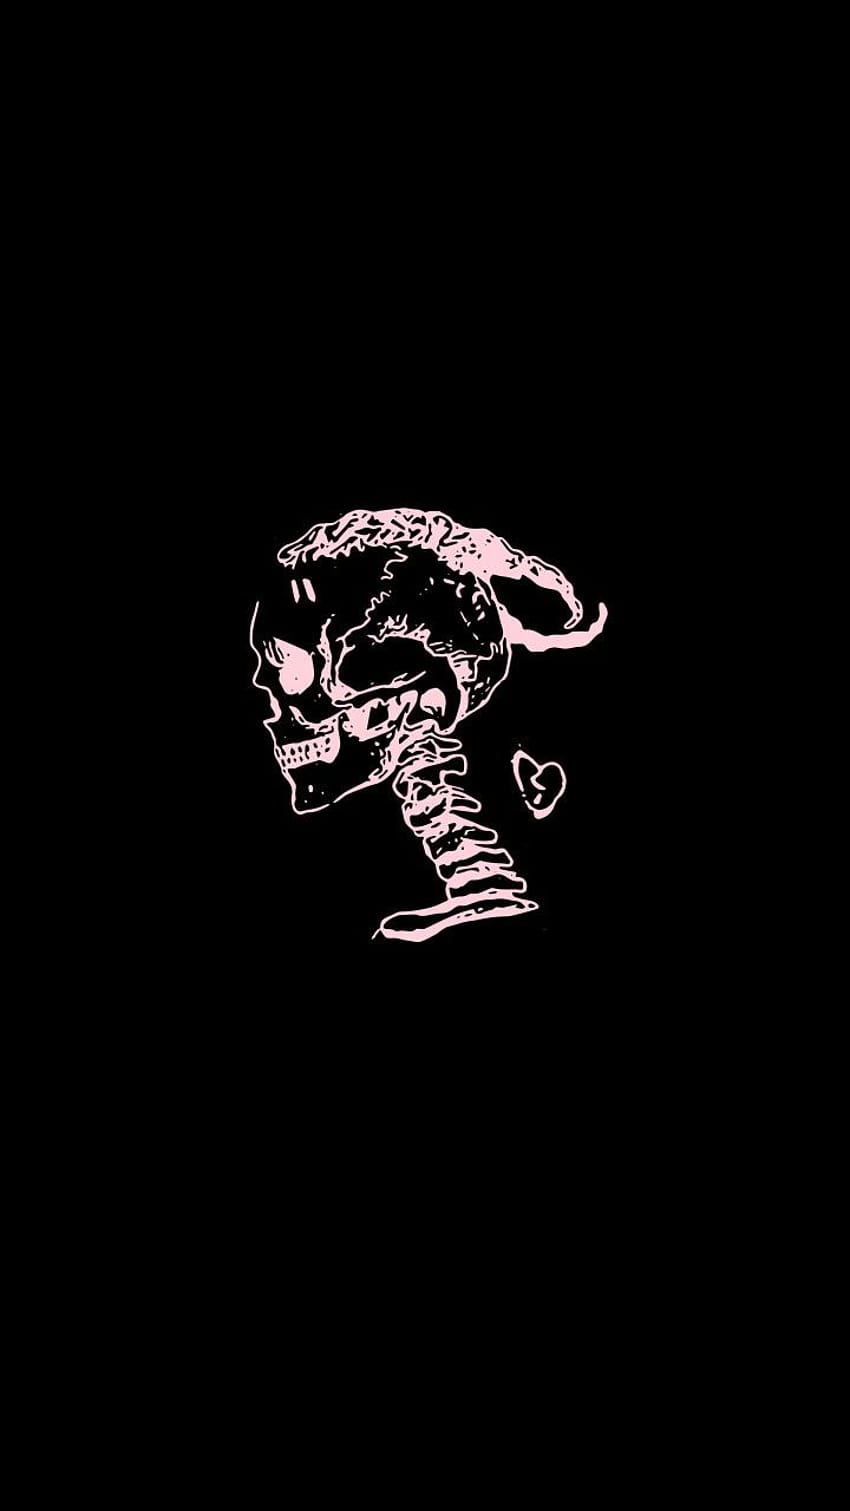 Anyone want this ? I can change the color from pink to whatever if you want. : XXXTENTACION, xxxtentacion changes HD phone wallpaper